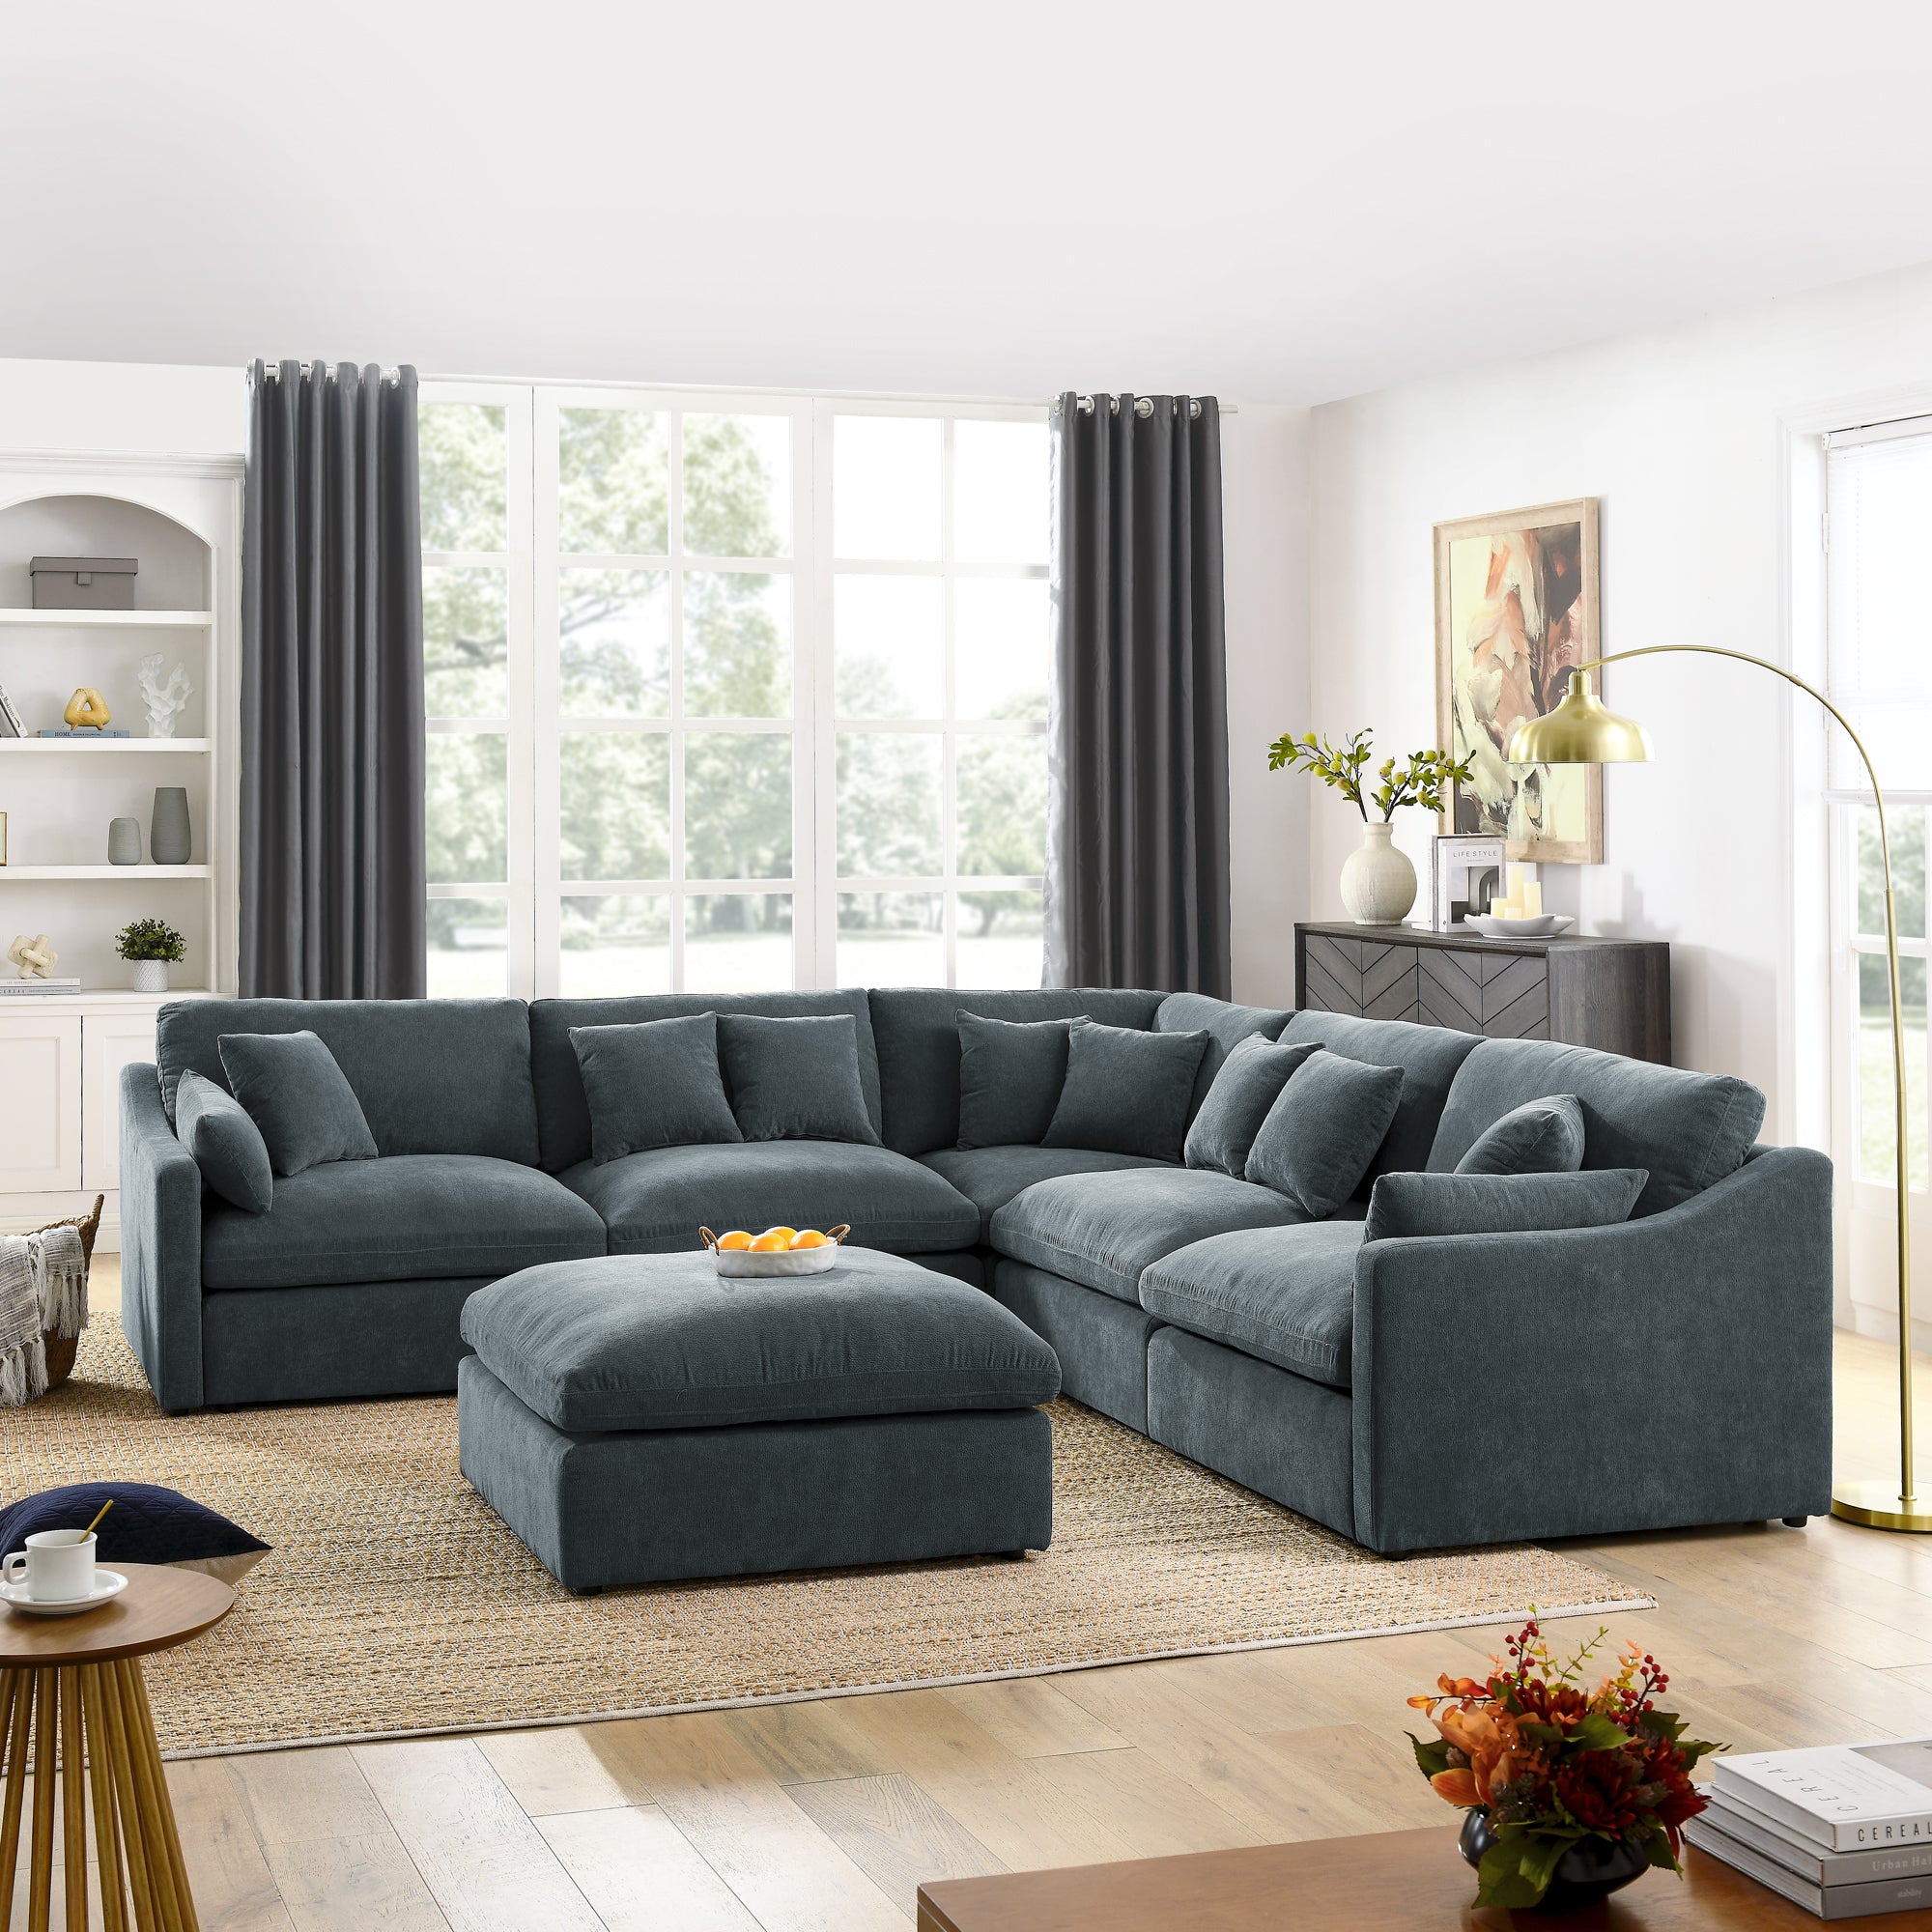 6 Seats Modular L Shaped Sectional Sofa with dark grey-chenille-wood-primary living